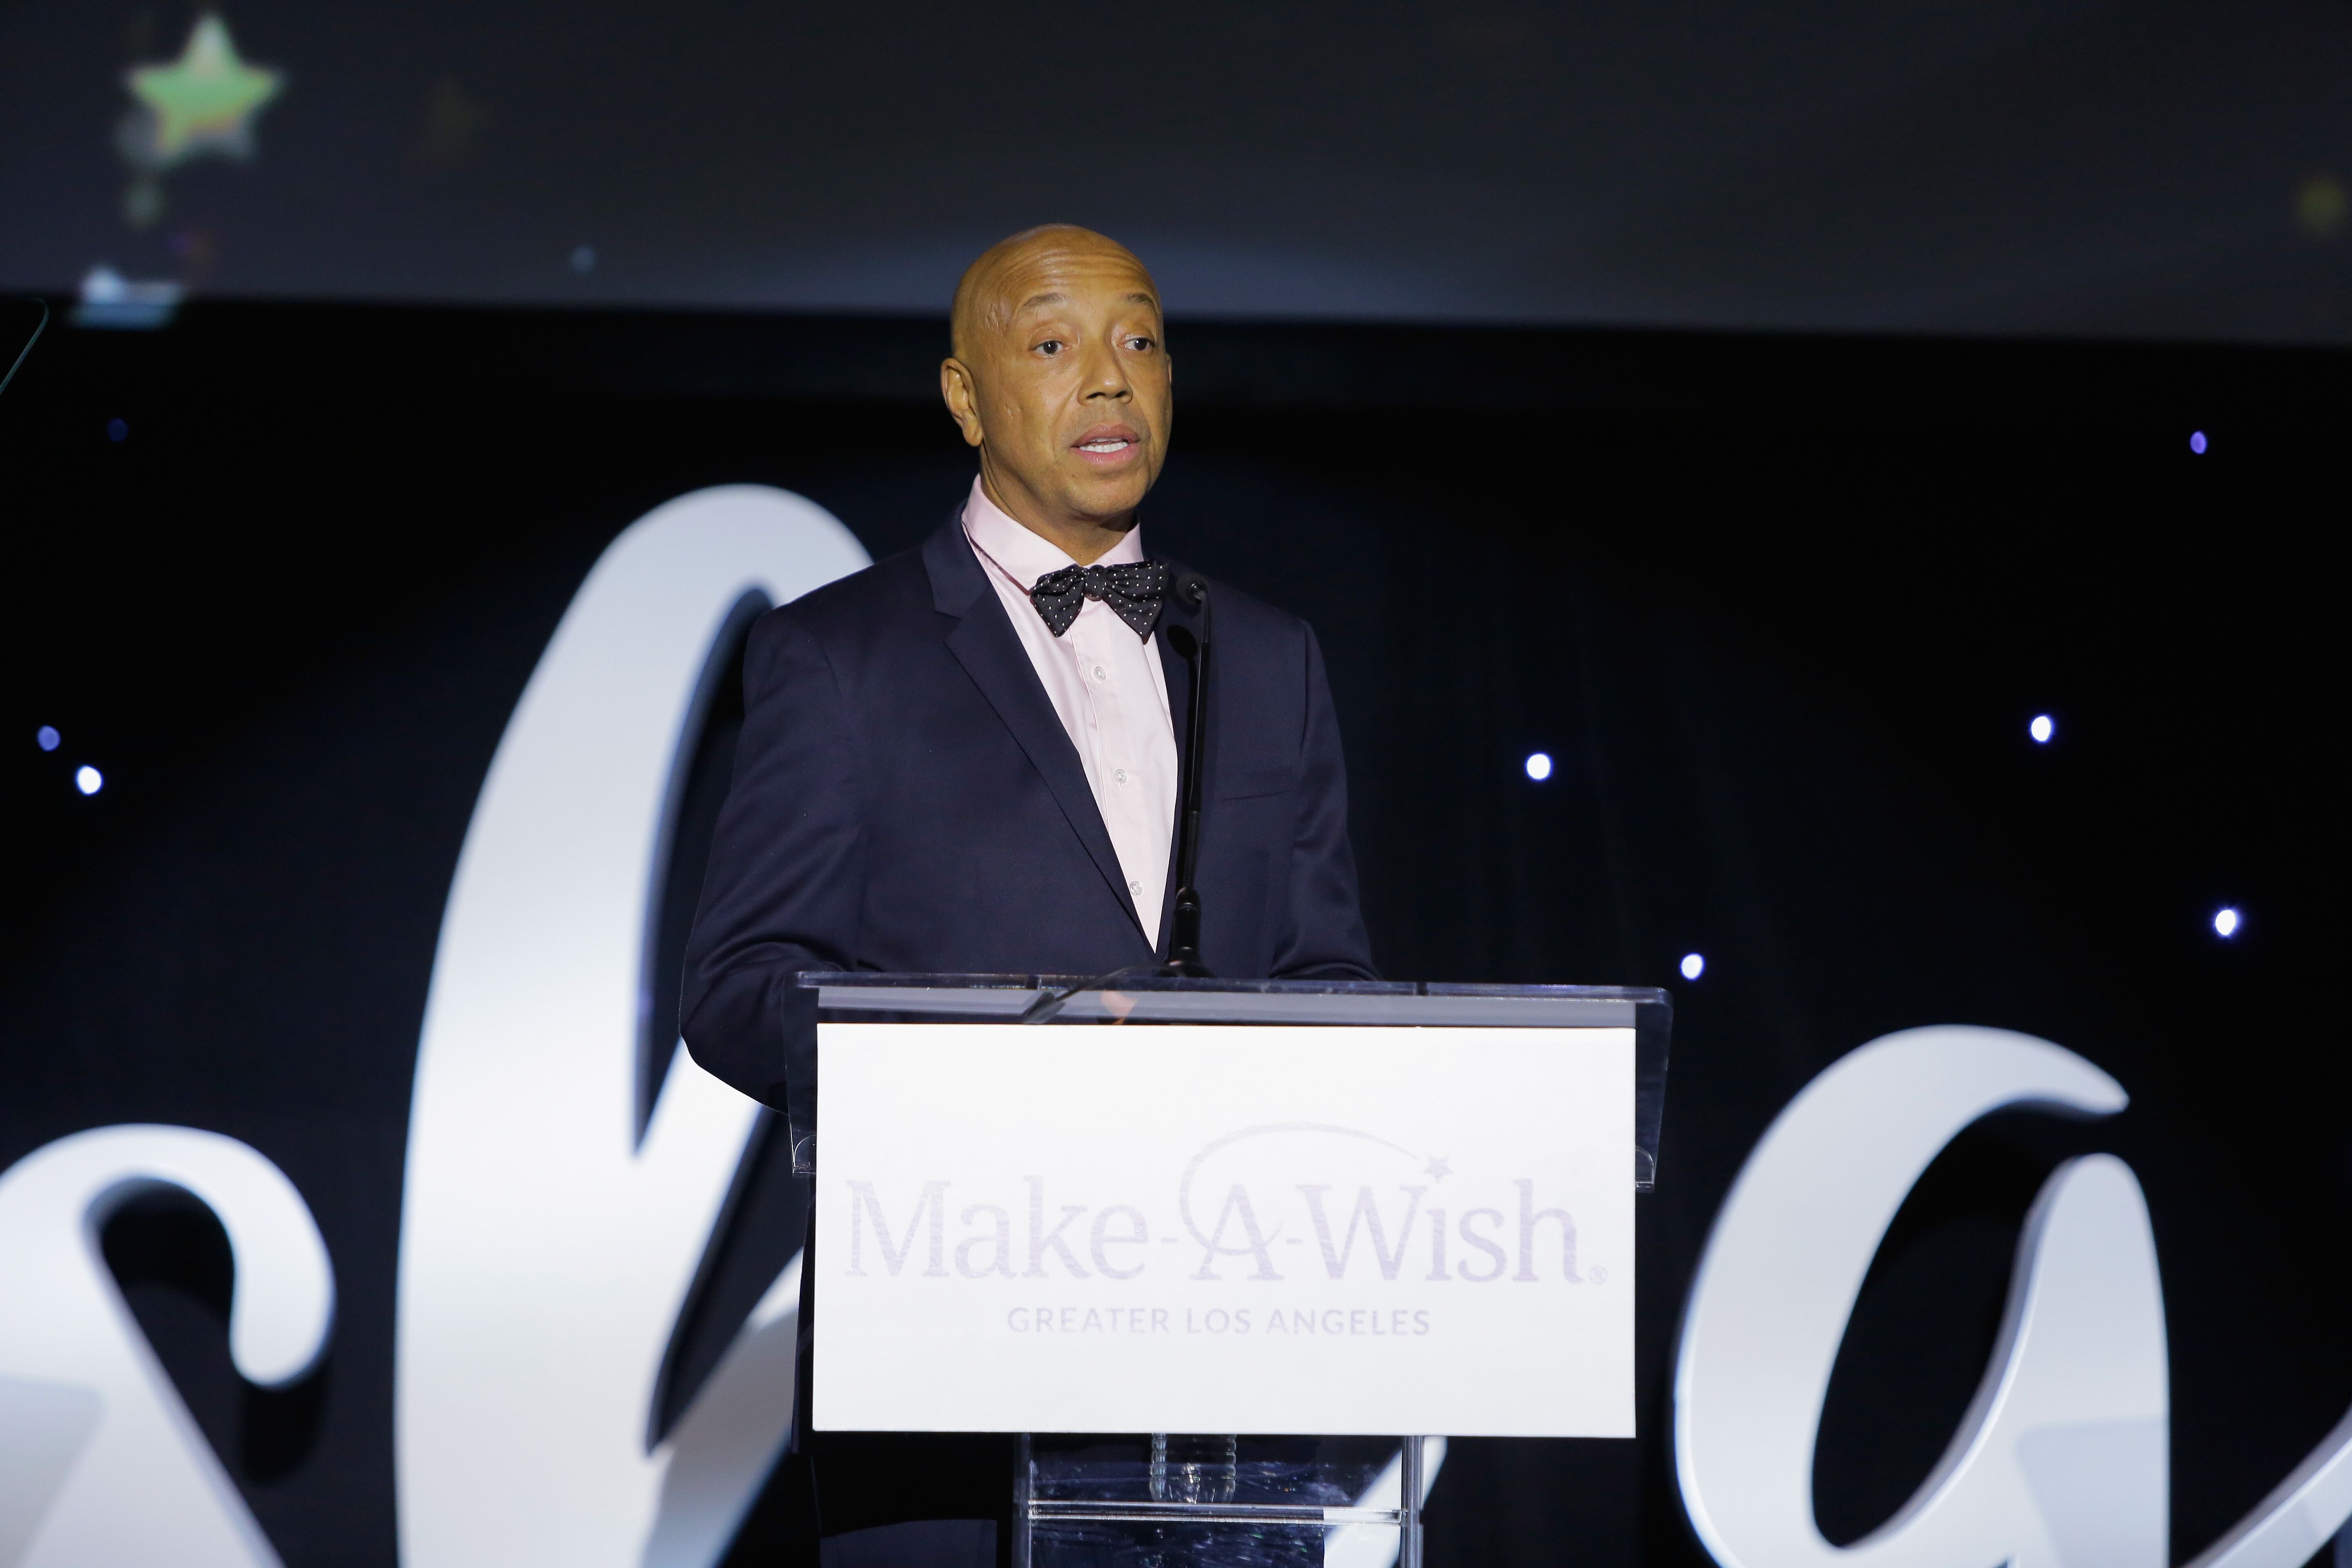 Russell Simmons at a Make A Wish Foundation event | Source: Getty Images/GlobalImagesUkraine